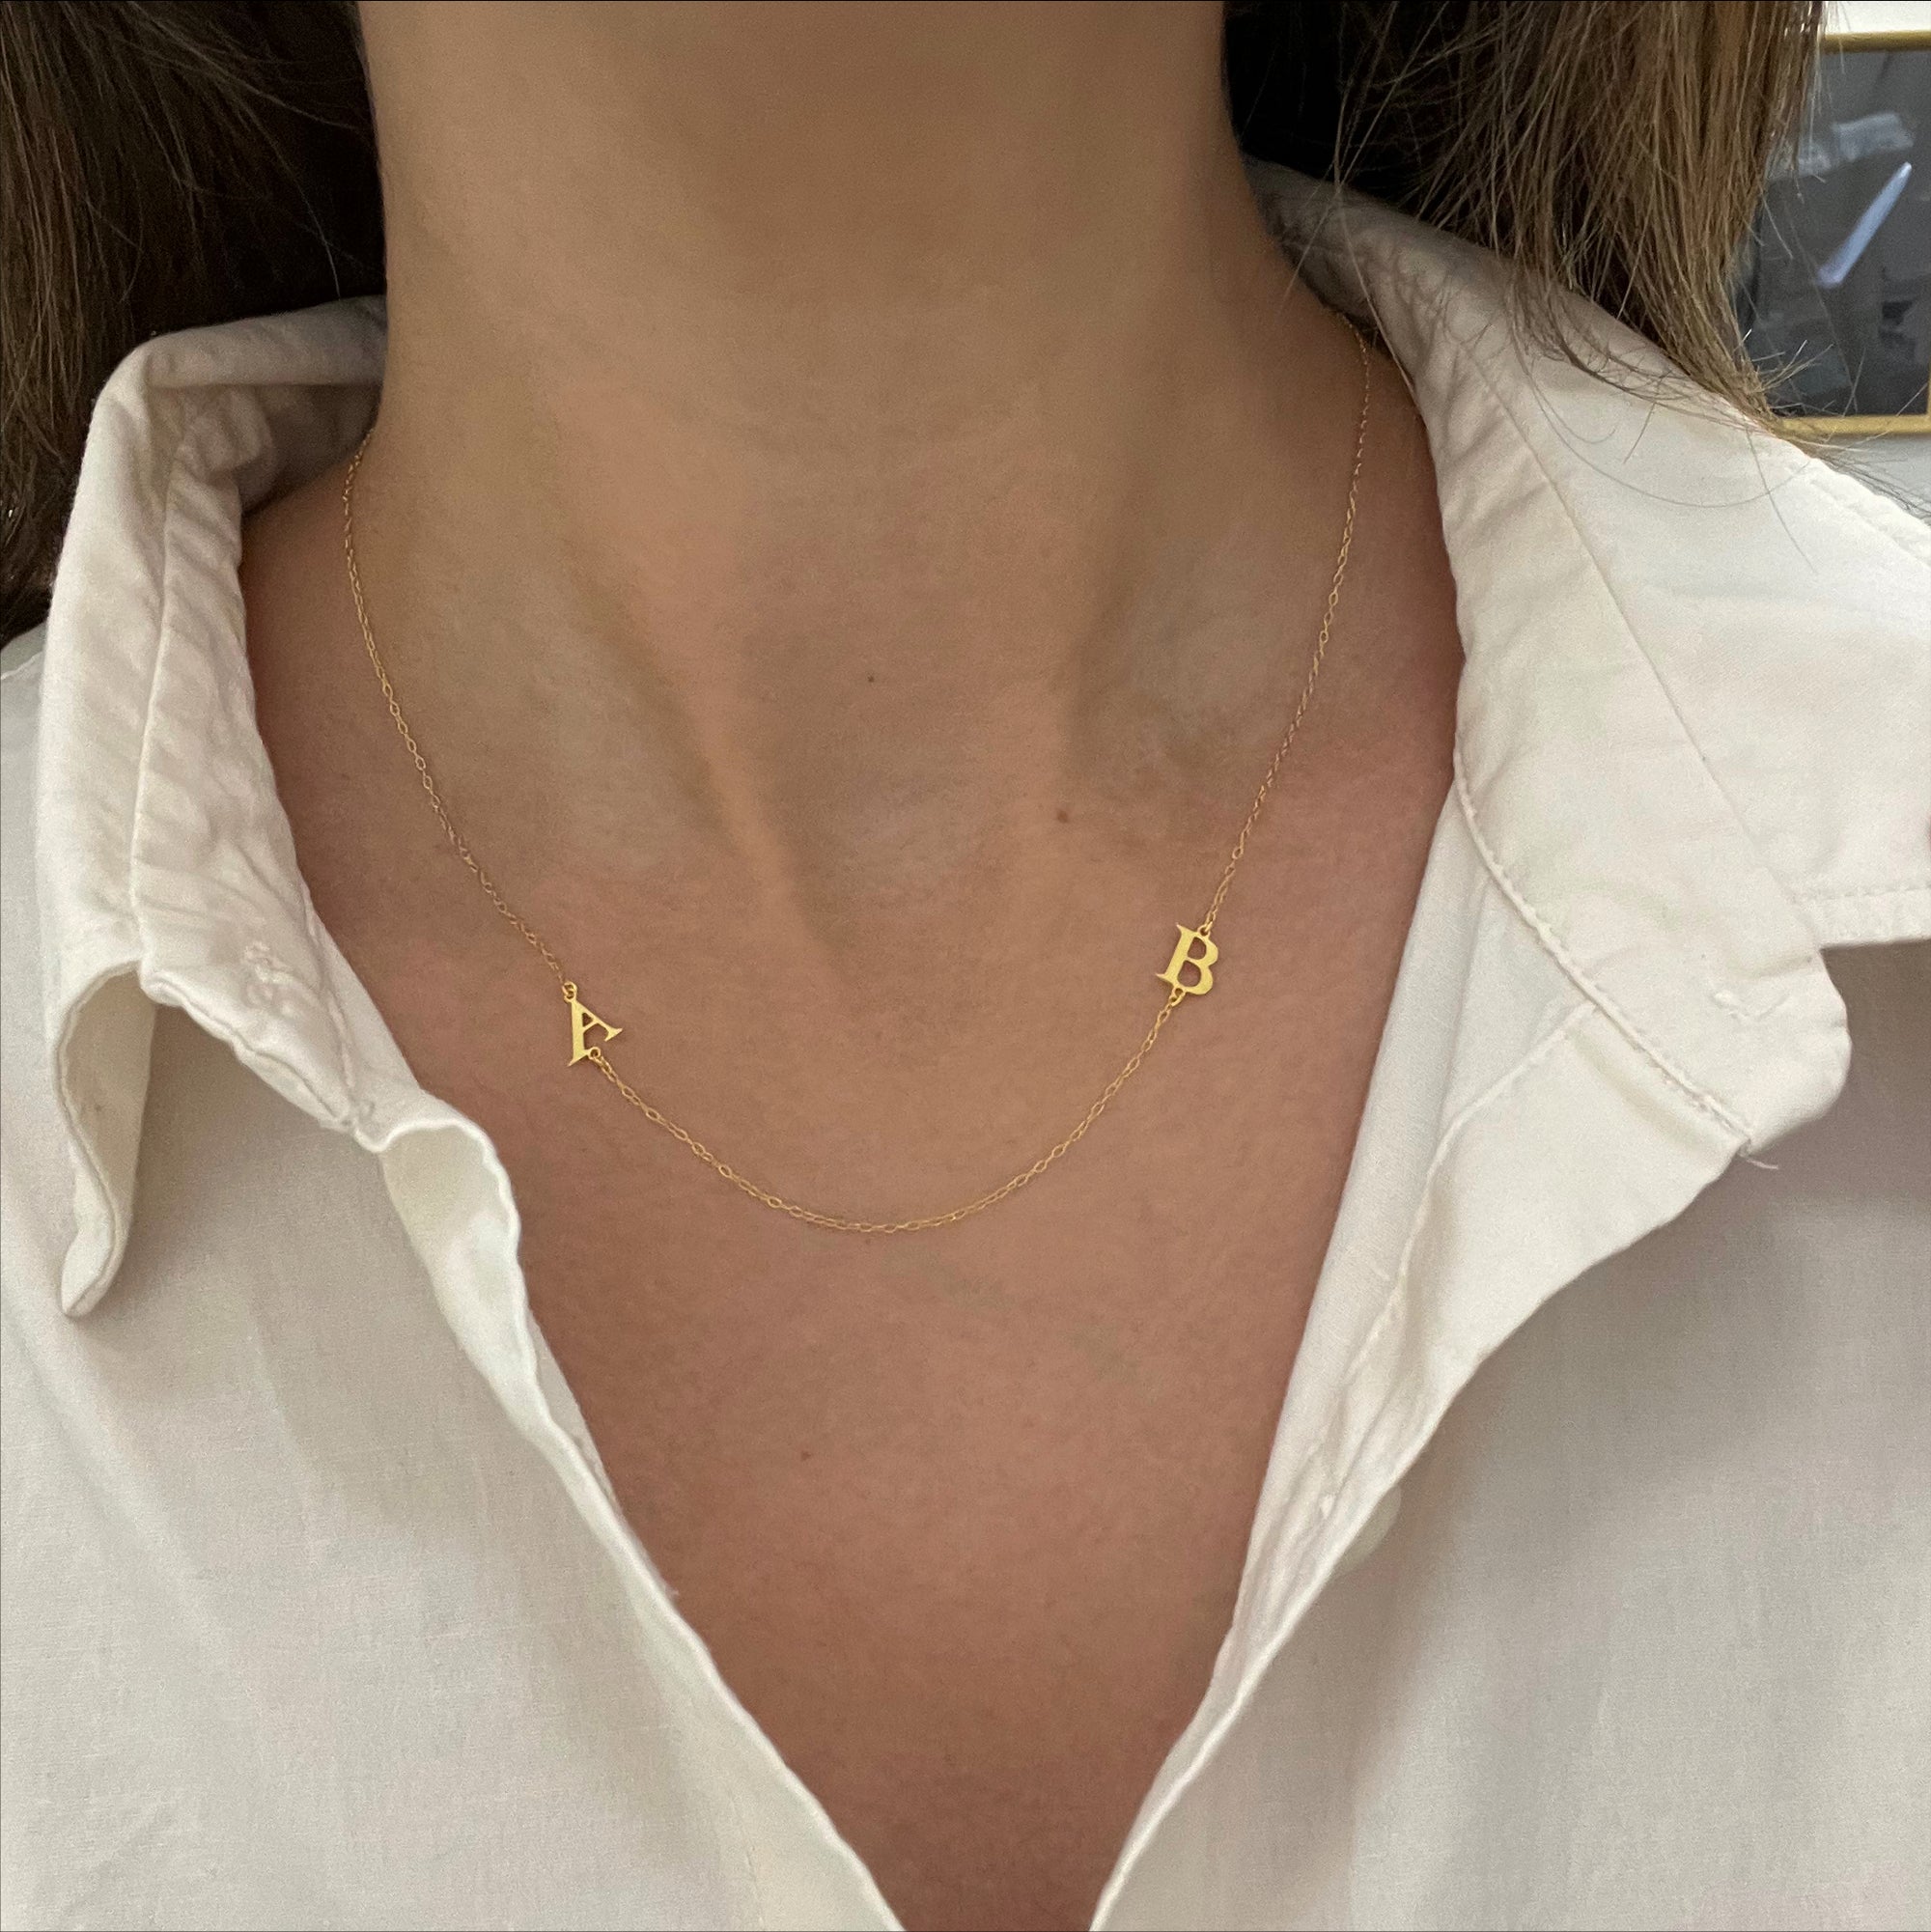 Luc Side Initials Necklace - Solid Gold